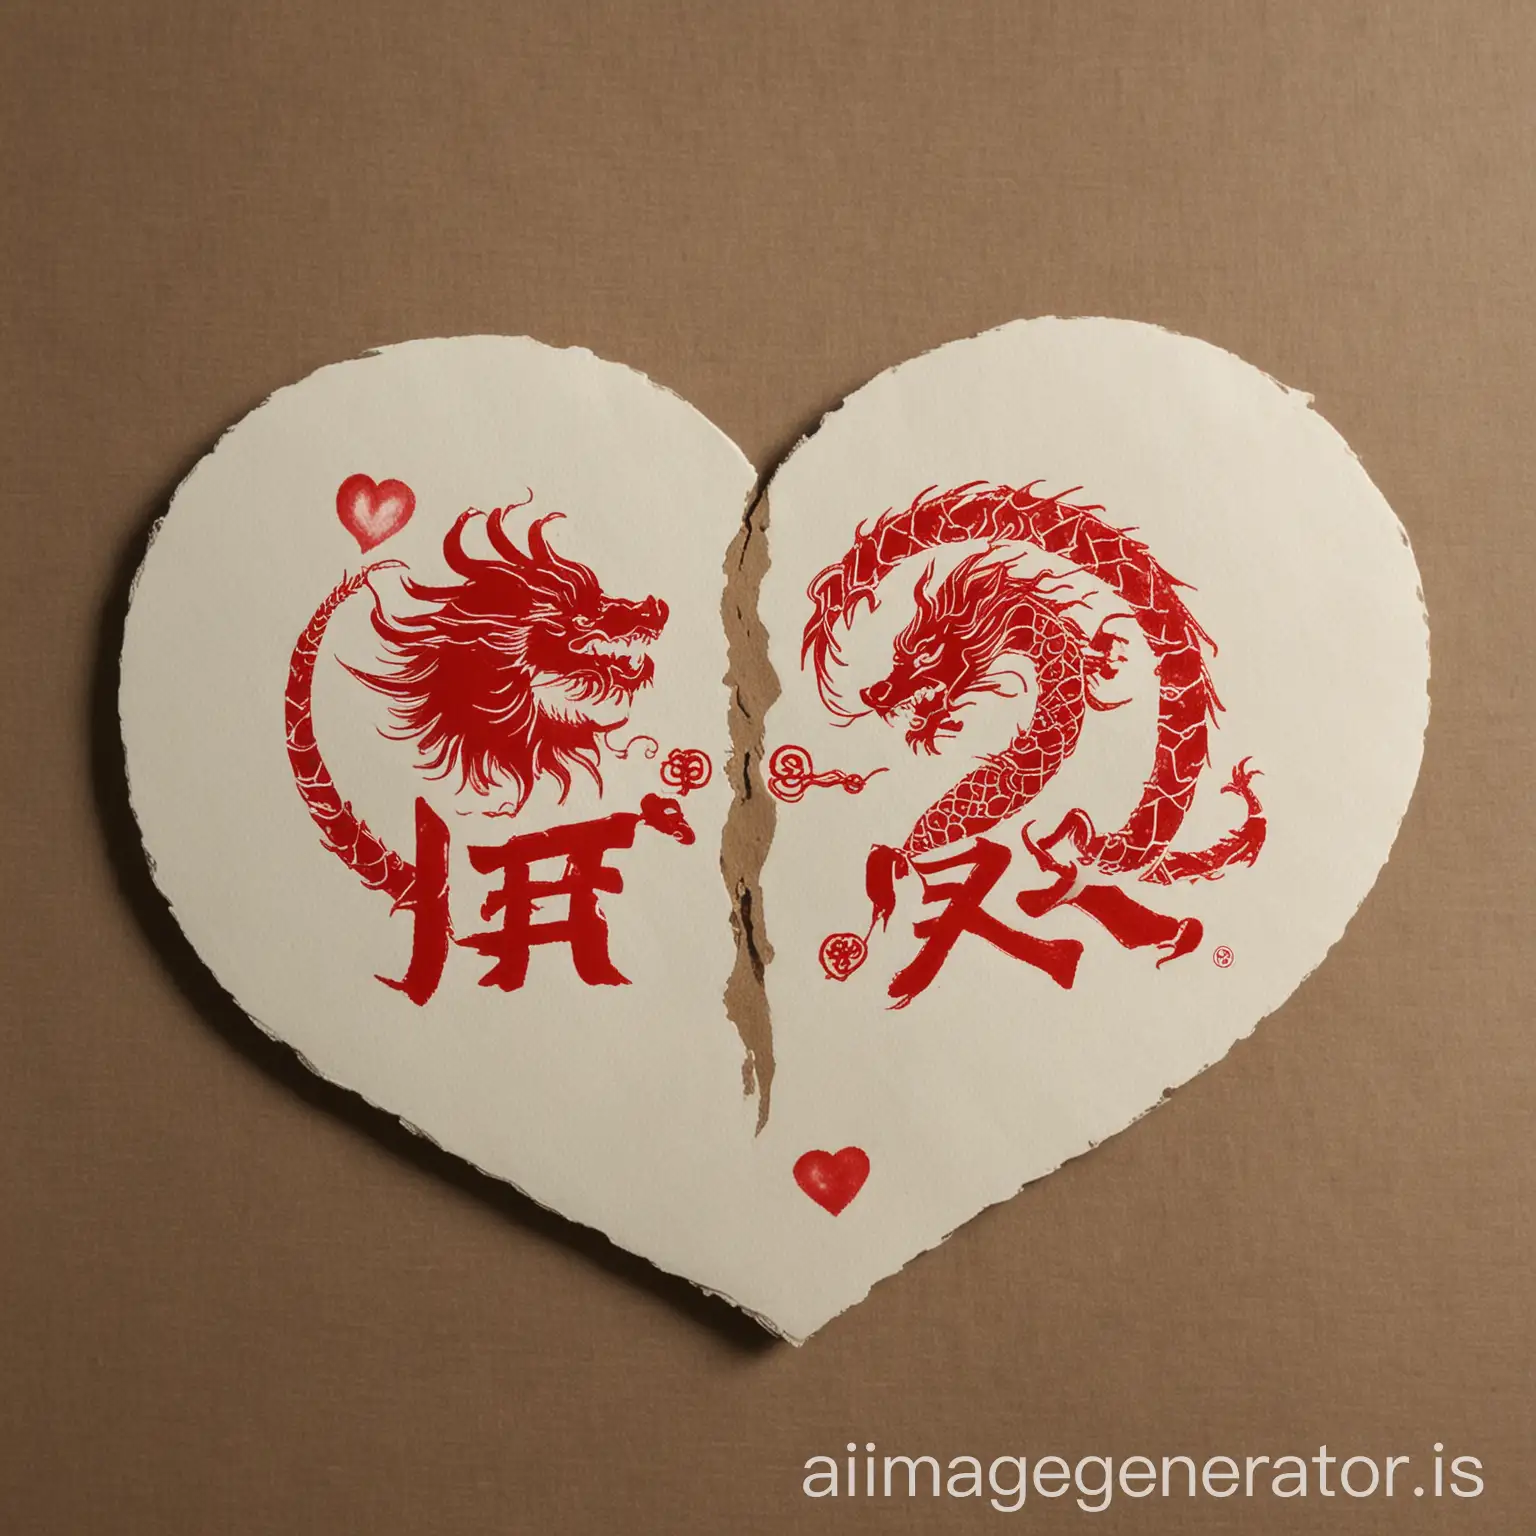 Qing-Mei-and-Shao-Long-Love-Heart-with-Dragon-and-Heart-Symbols